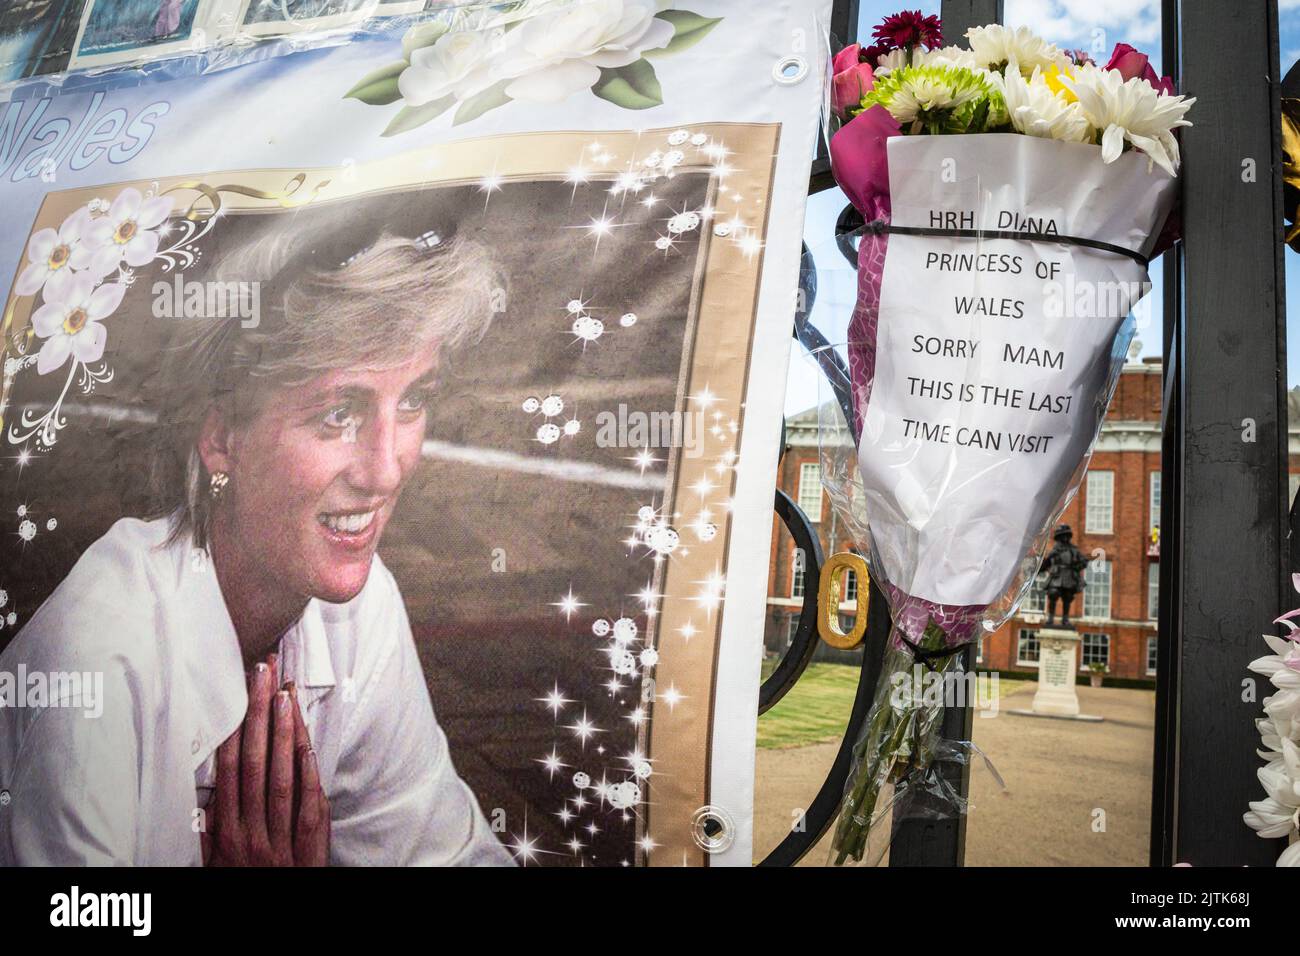 London, UK. 31st Aug, 2022. One of Diana's original staff visited the site early to leave flowers with a message. Royal fans and visitors gather at the gates to Kensington Palace to commemorate the 25th anniversary of th tragic death of Diana Princess of Wales. Credit: Imageplotter/Alamy Live News Stock Photo